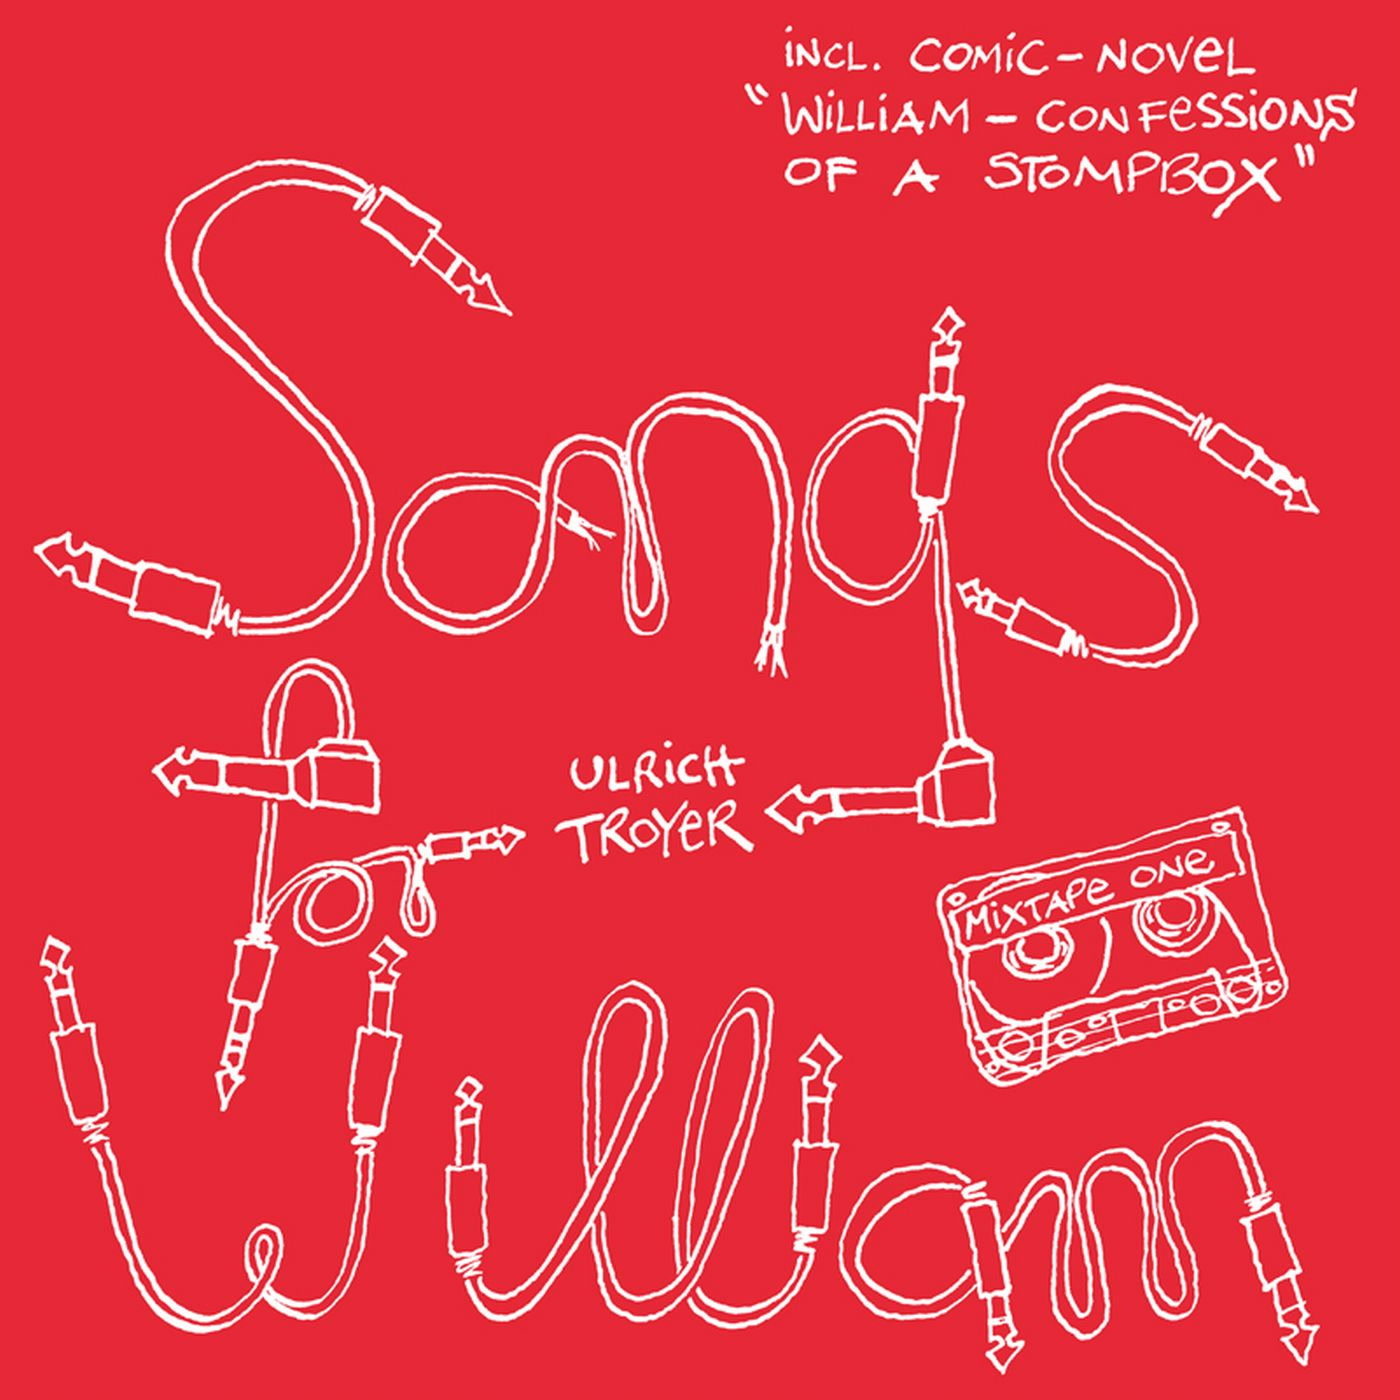 Songs For William - Ulrich Troyer